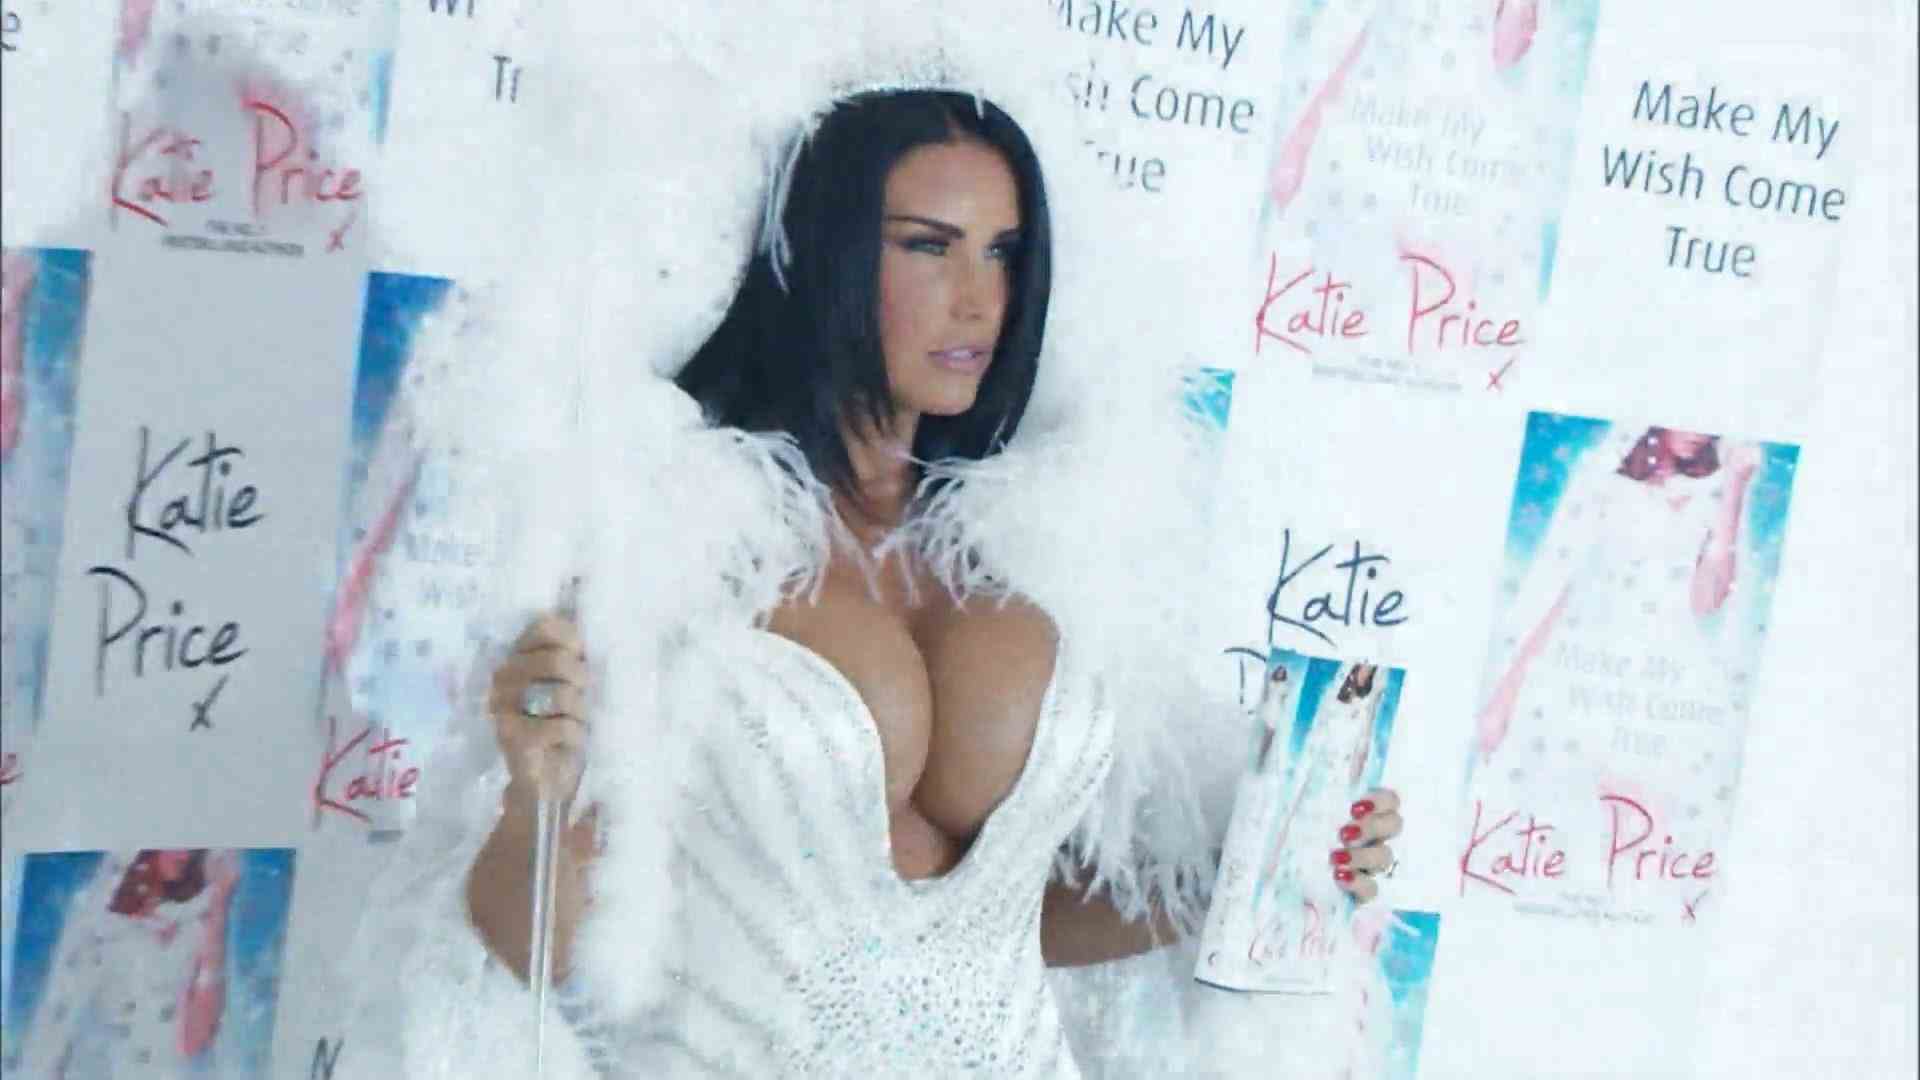 Katie Price sells her clothes Almost 2,500 have to go!